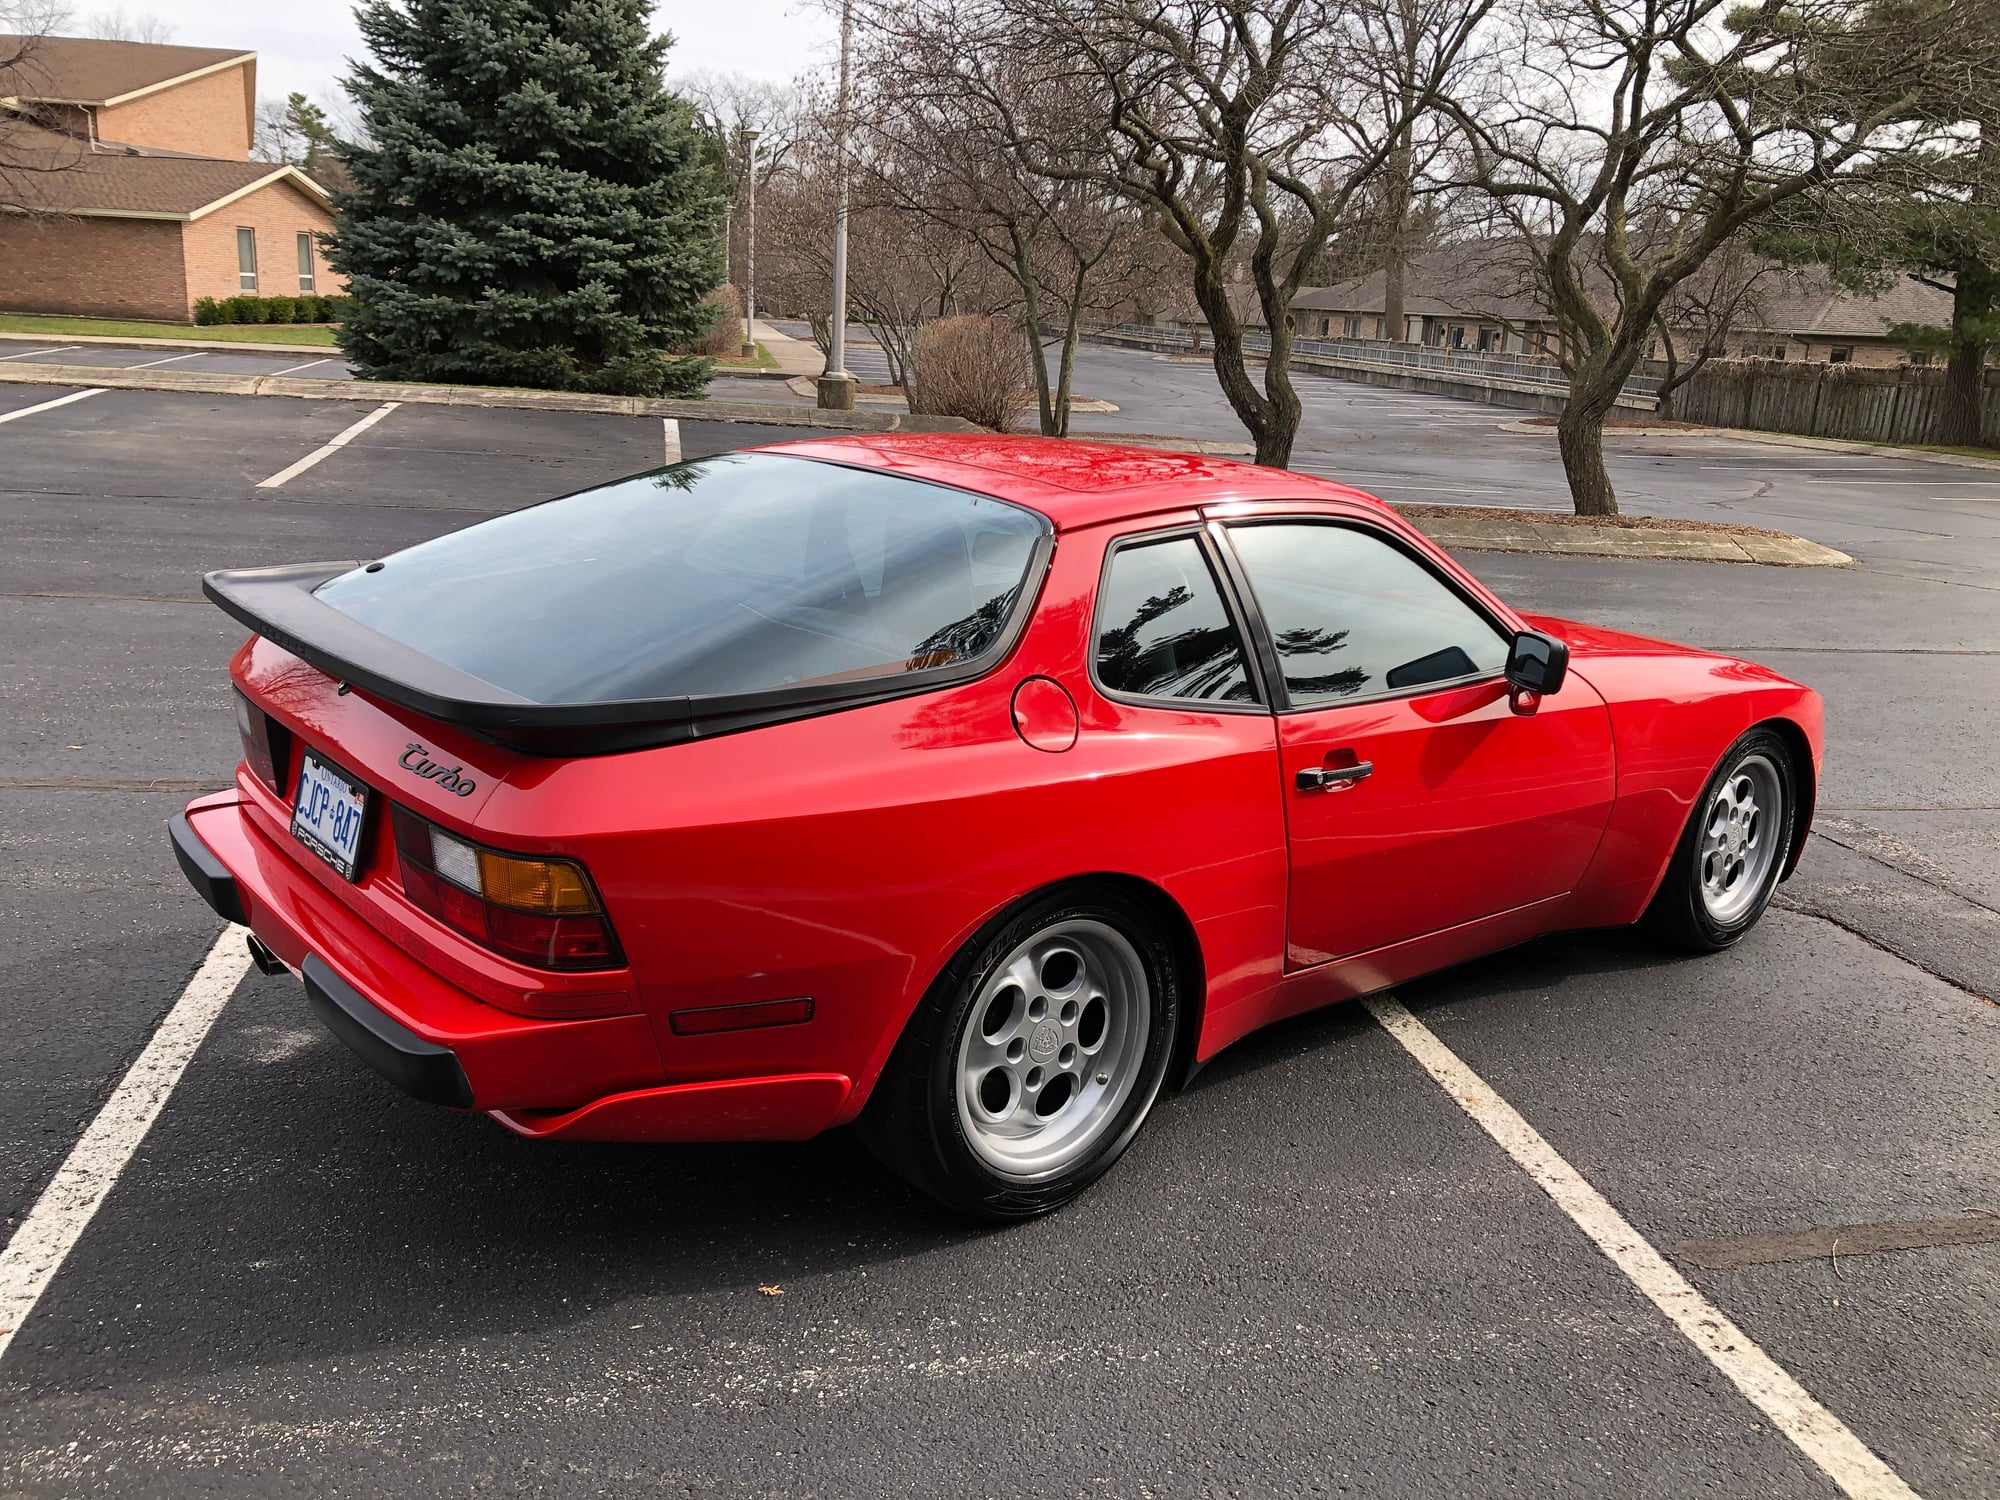 1986 Porsche 944 - 1986 Porsche 944 Turbo - Used - VIN WP0AA0951GN150244 - 107,000 Miles - 4 cyl - 2WD - Manual - Coupe - Red - London, ON N6K, Canada